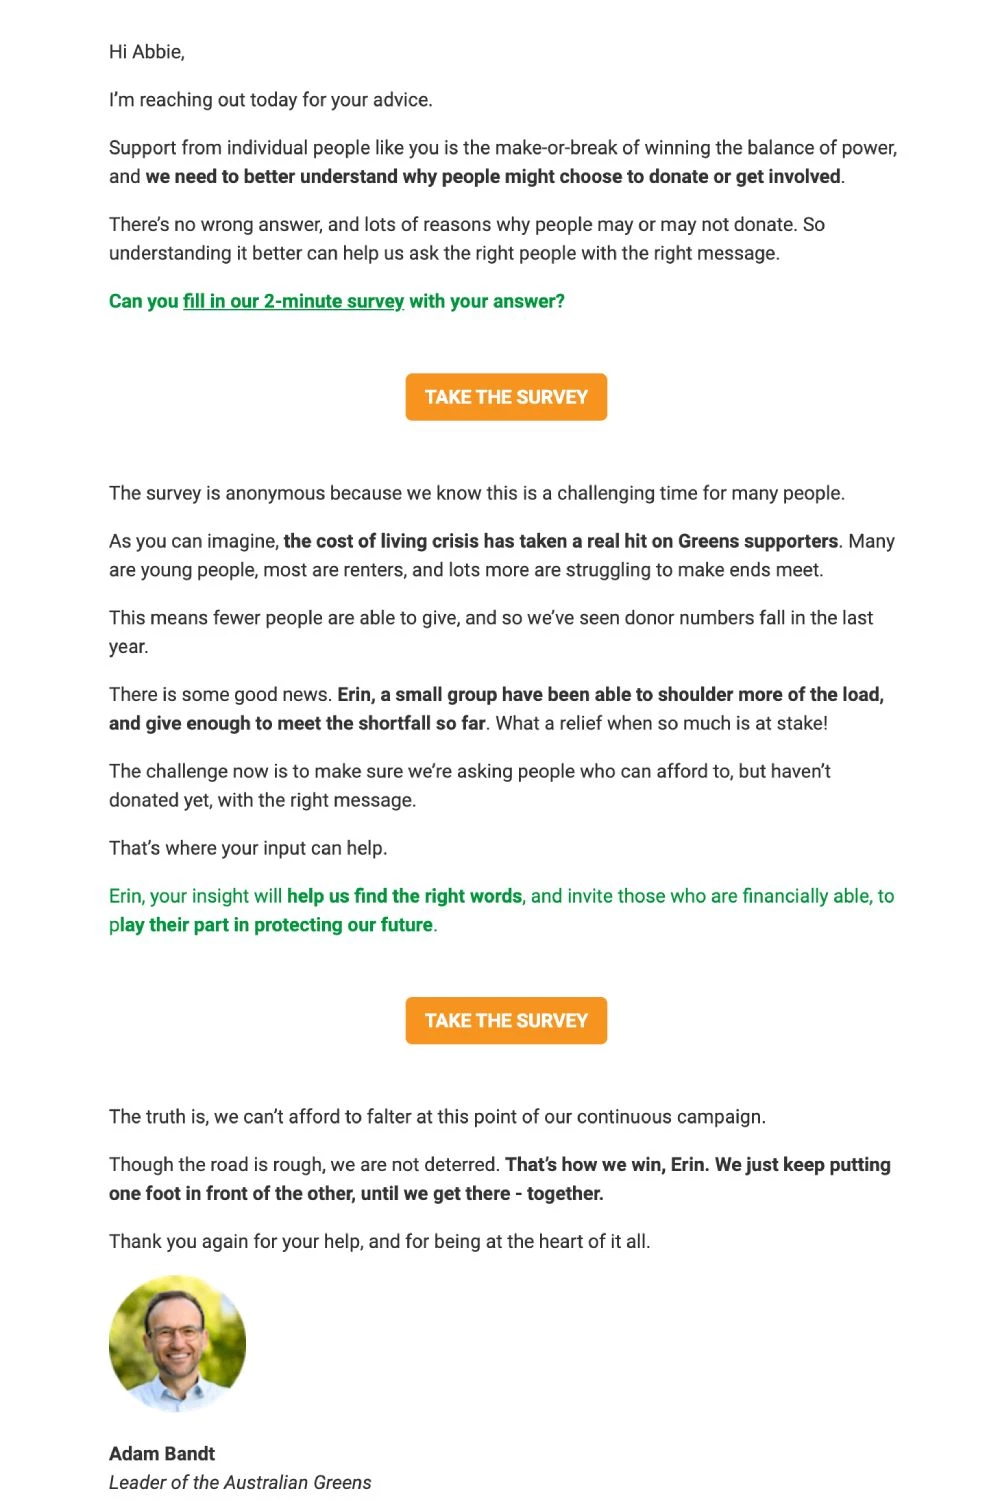 Example of a market research survey from Australian Greens.